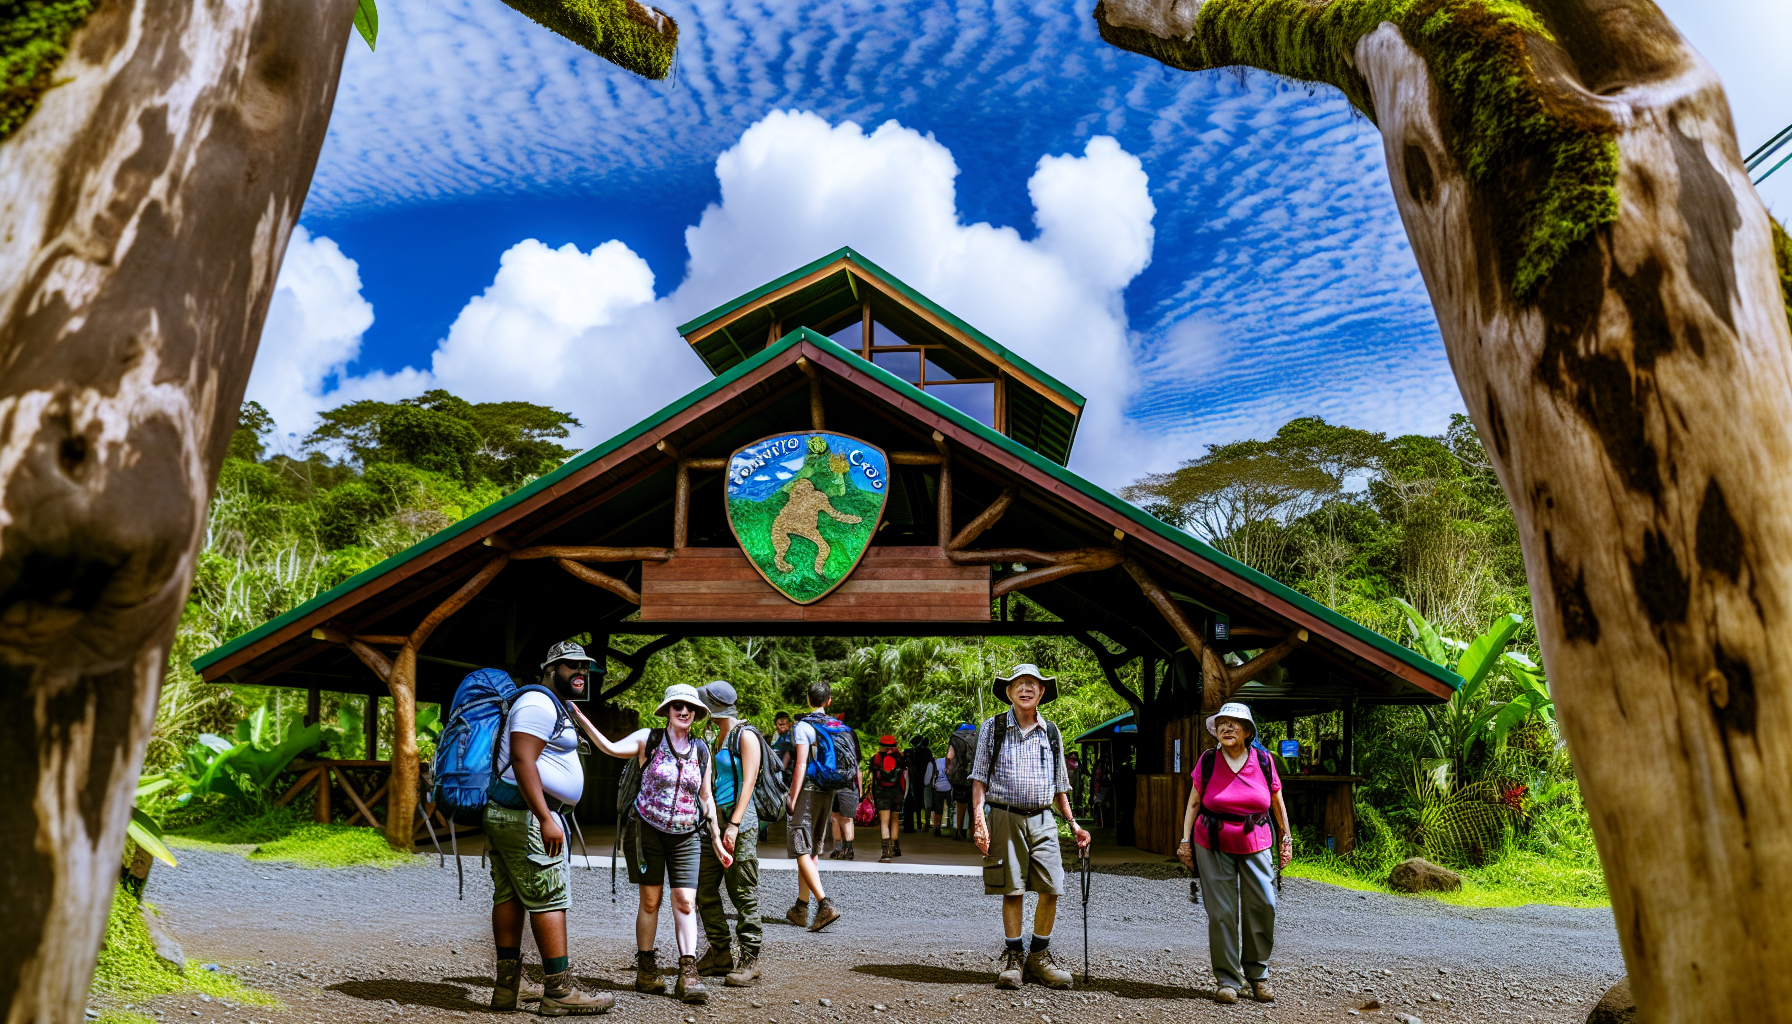 Entrance to Tenorio Volcano National Park with visitors exploring the area